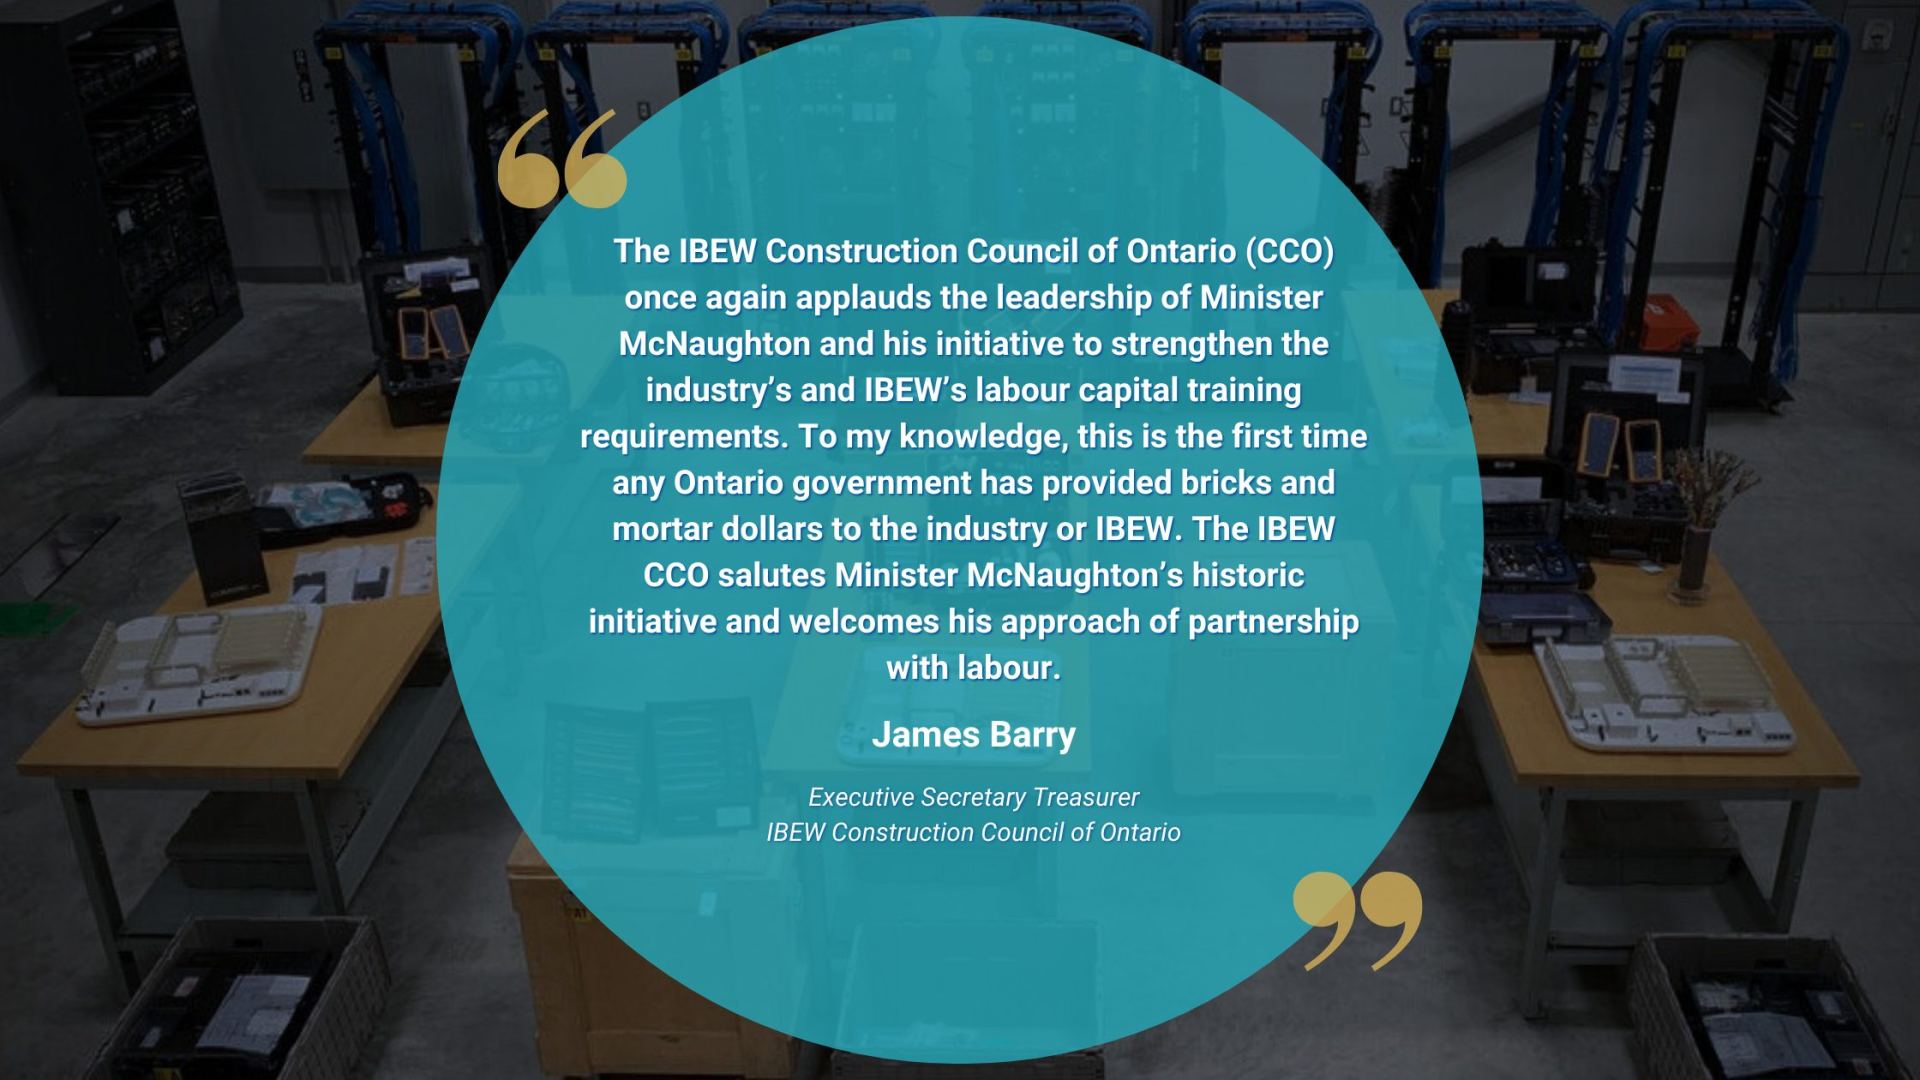 Ontario Skilled Trades Training Fund: The IBEW CCO Salutes Minister for Historic Initiative